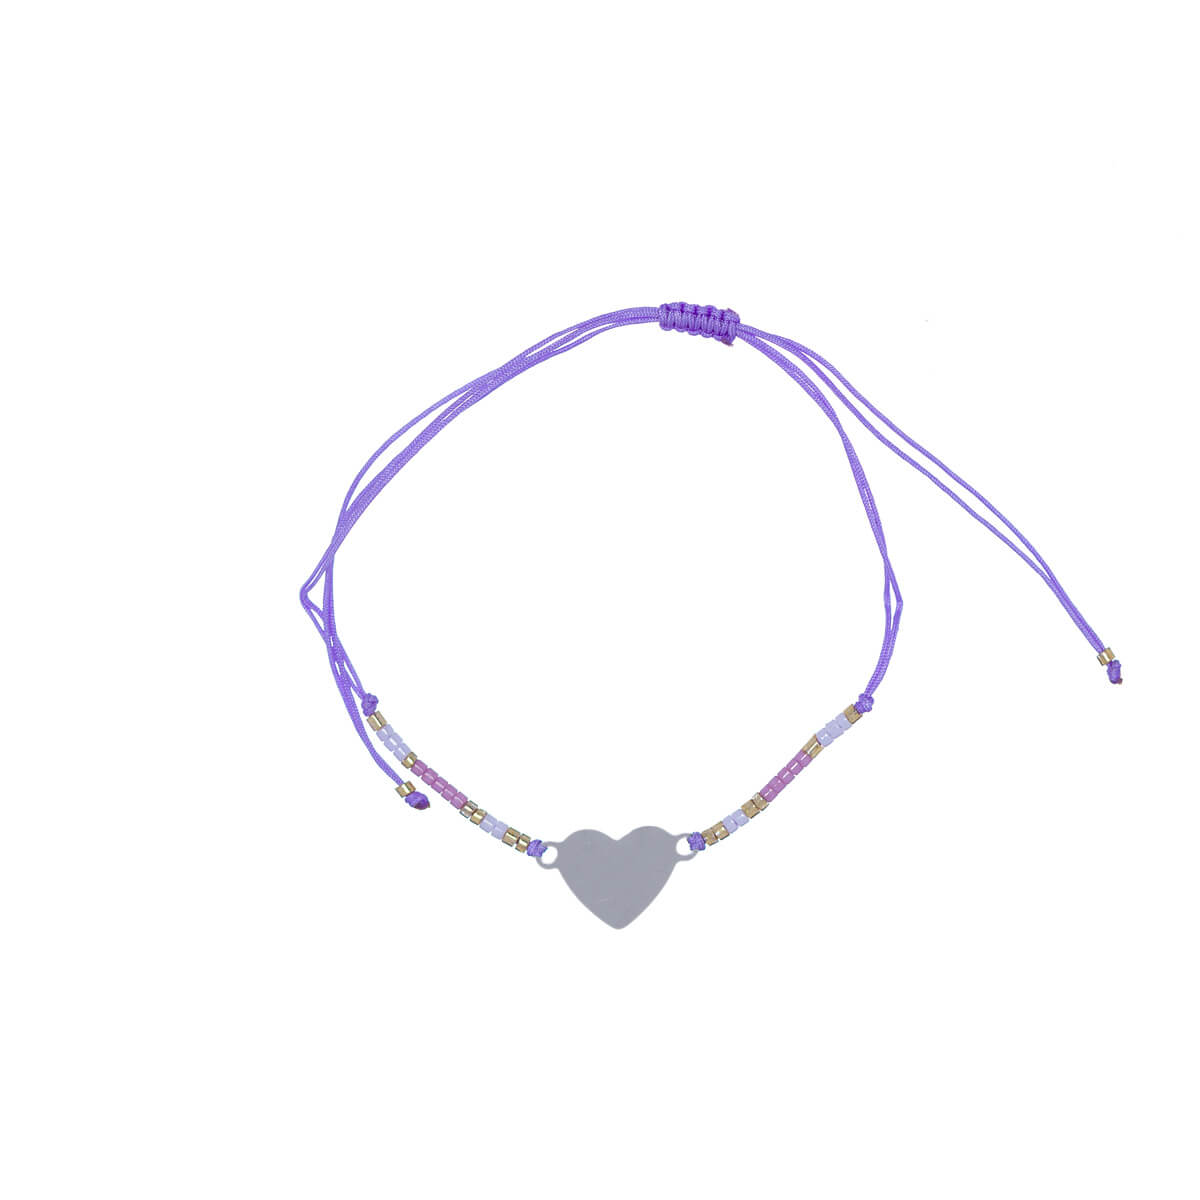 Heart bracelet with small beads (steel 316L)